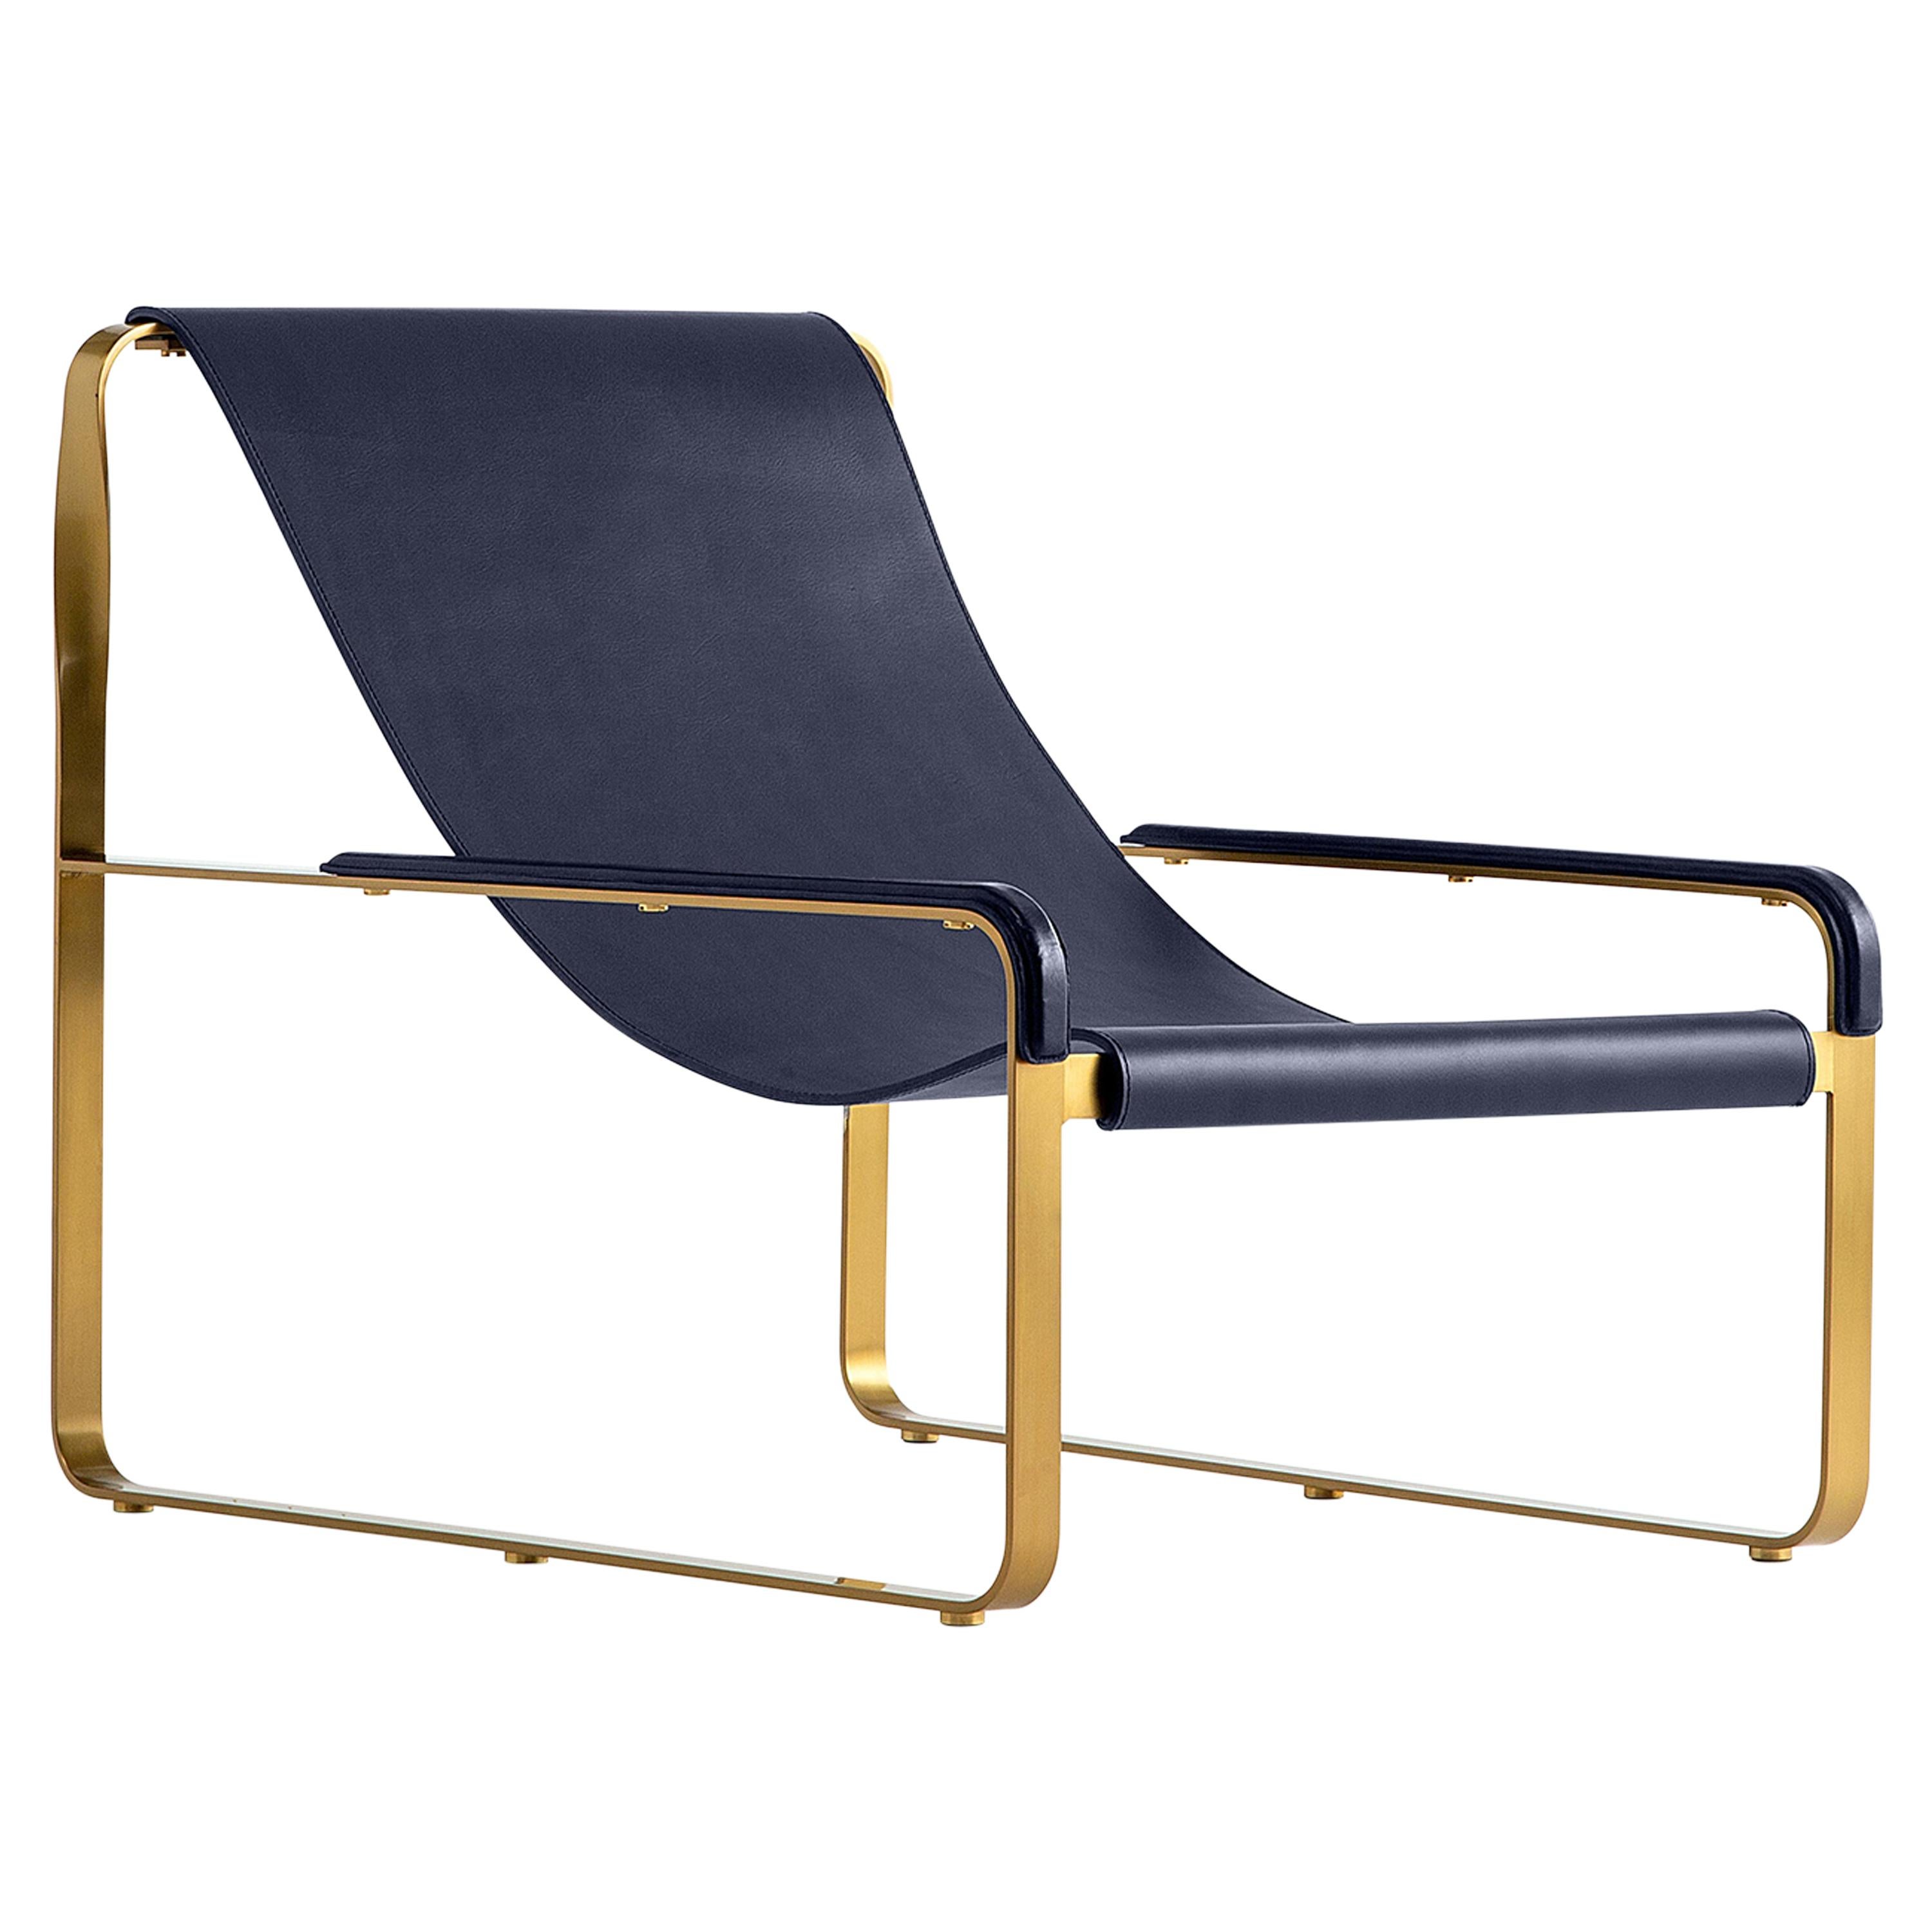 Classic Contemporary Chaise Lounge Aged Brass Steel & Navy Blue Leather For Sale